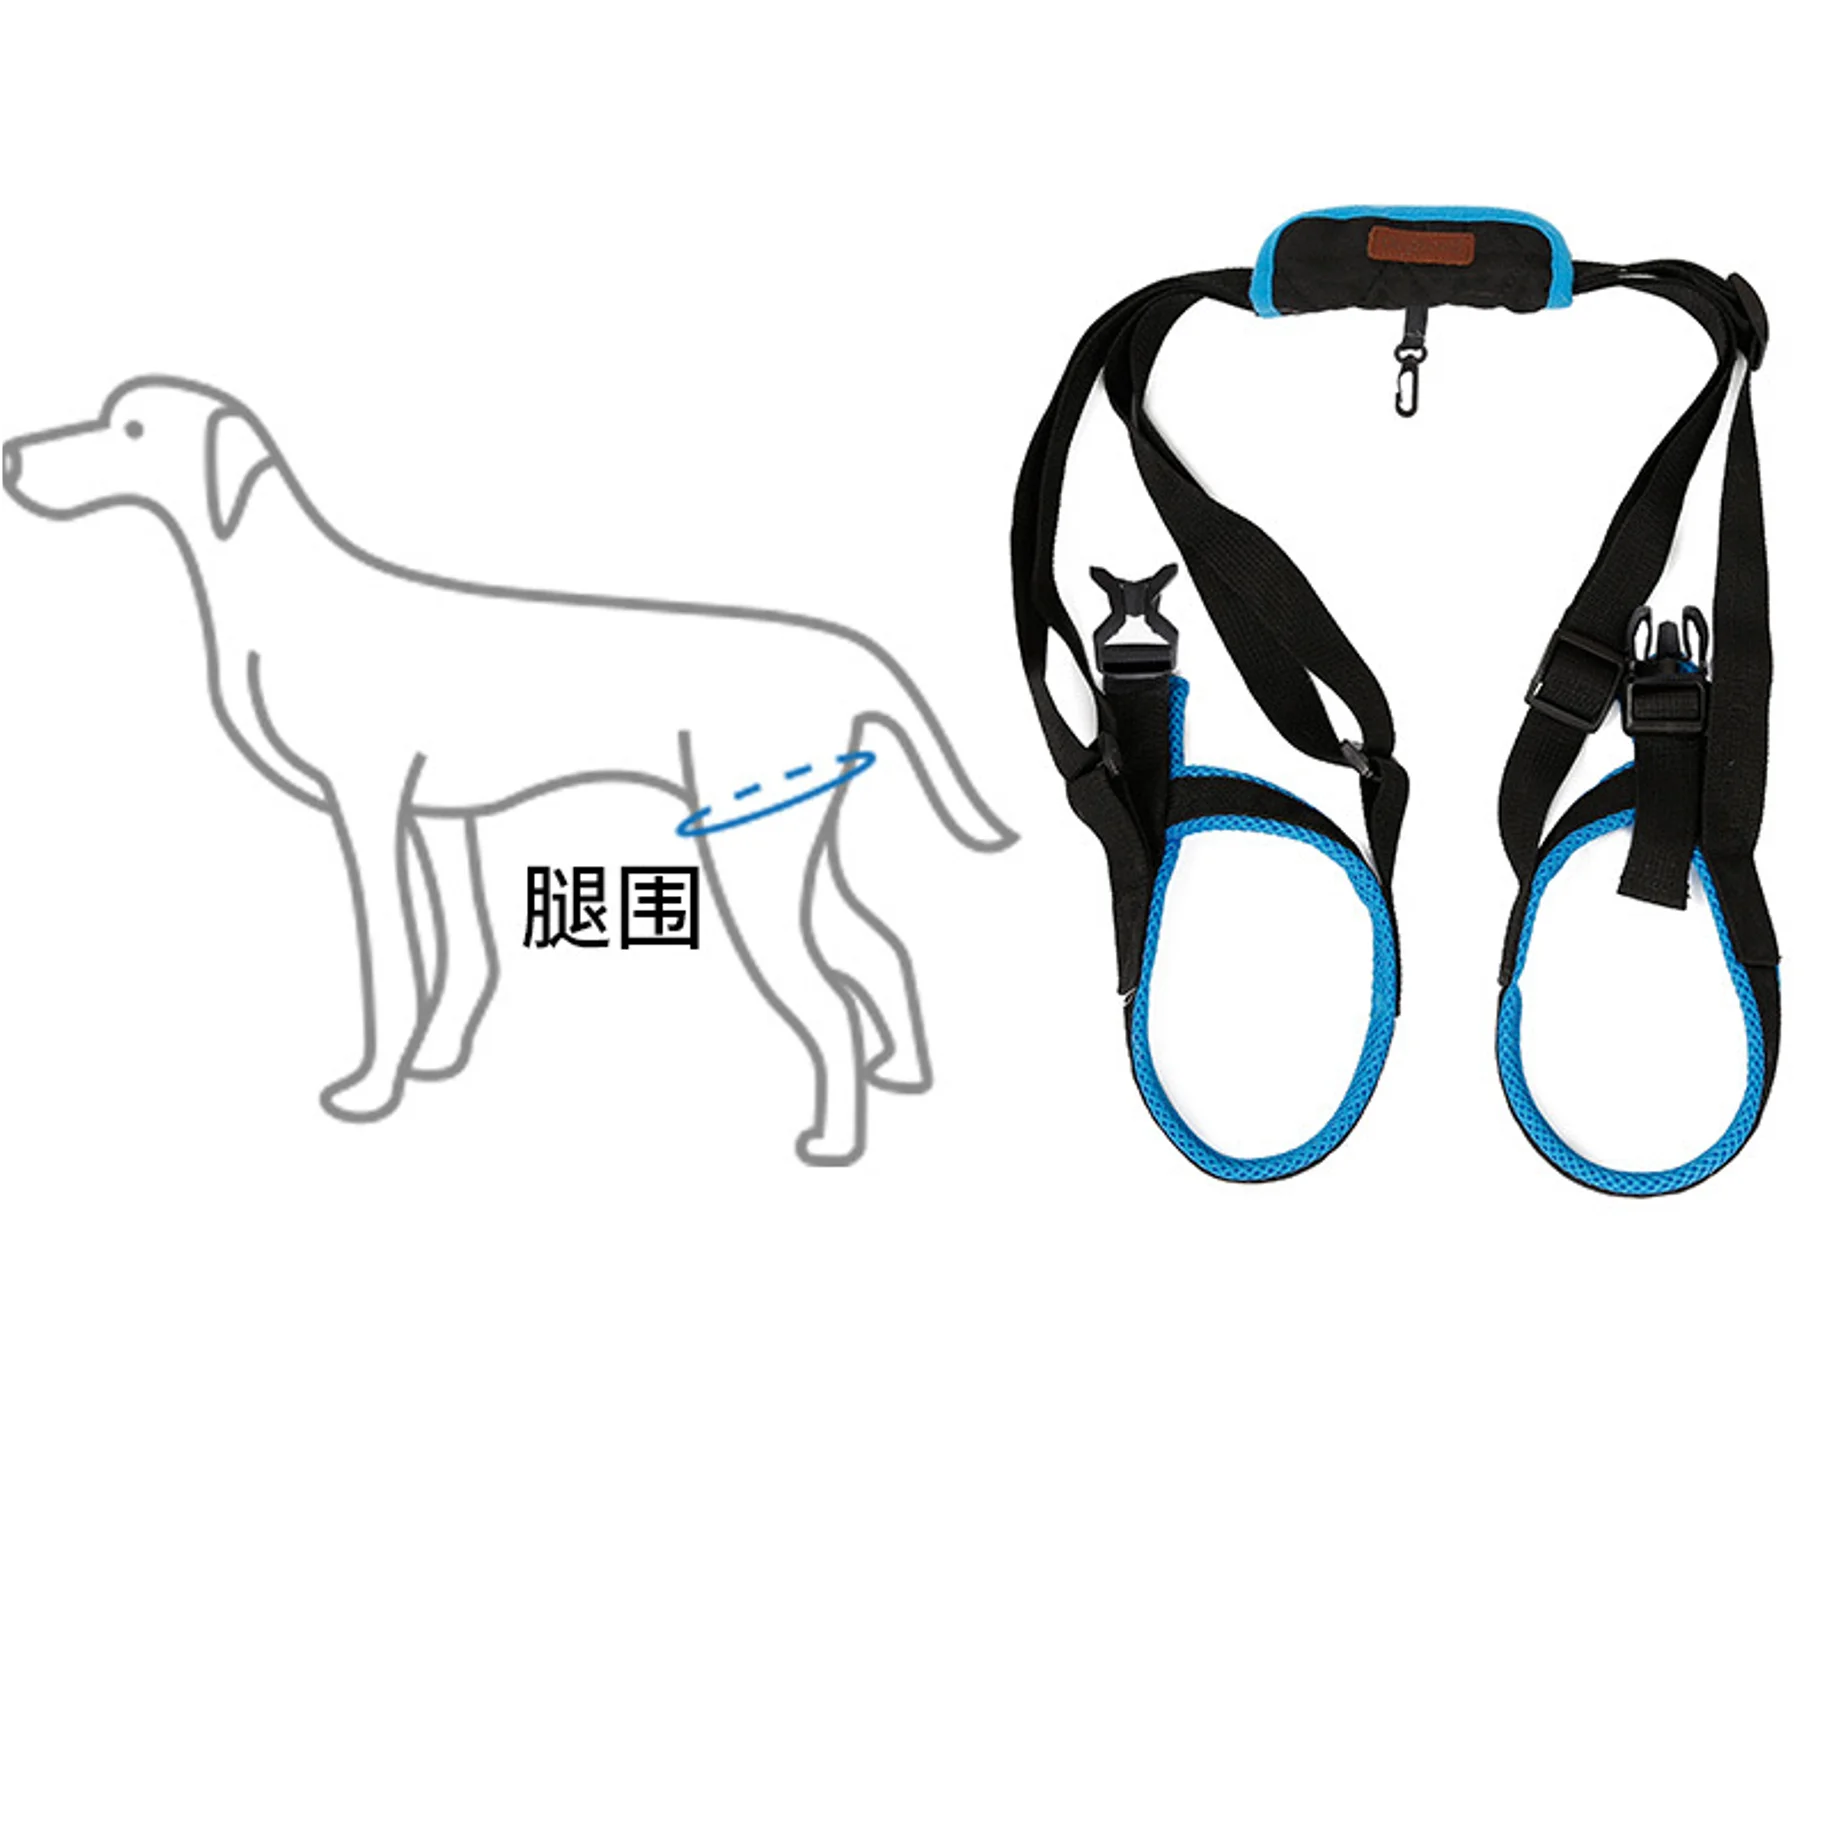 Full Body Support Rehabilitation Injury Dog Lift Harness Disabled Pet Leash (1600384129493)